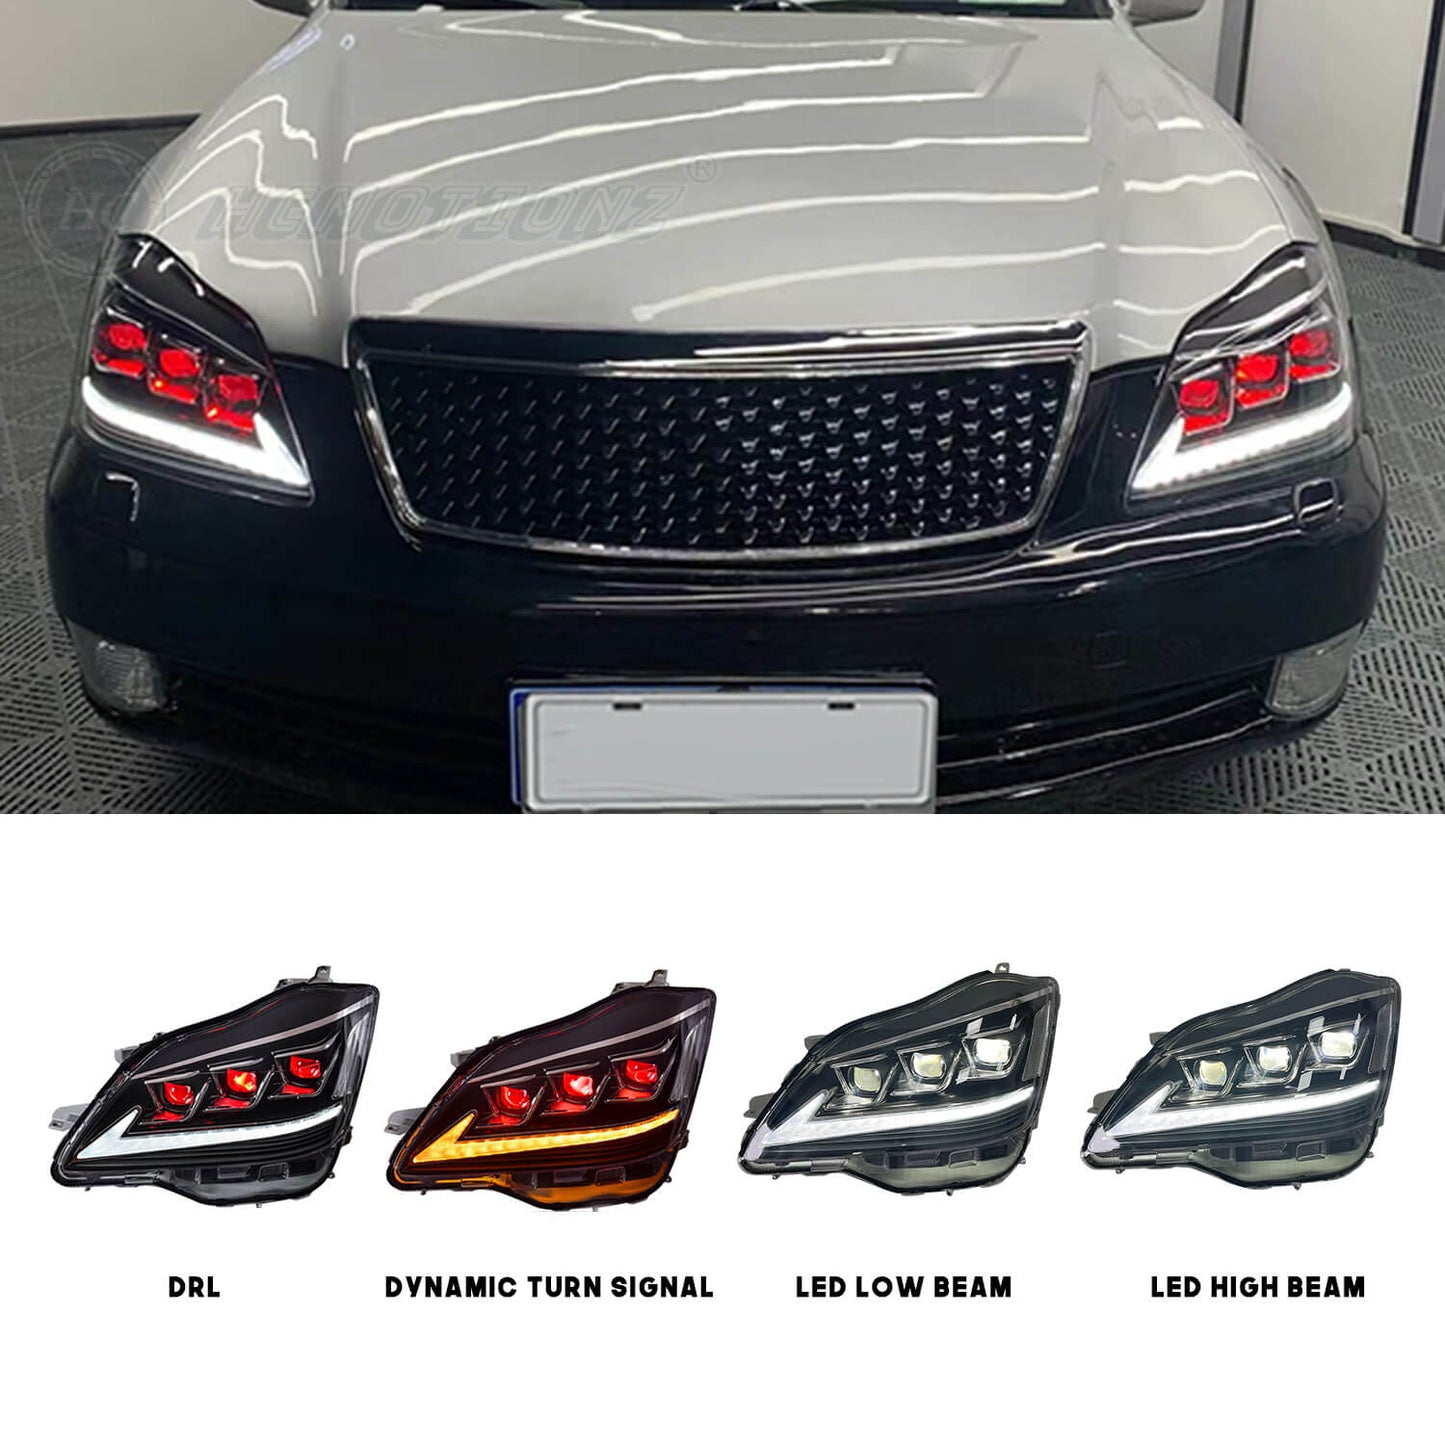 HCMOTION LED Headlights For Toyota Crown 2003-2008